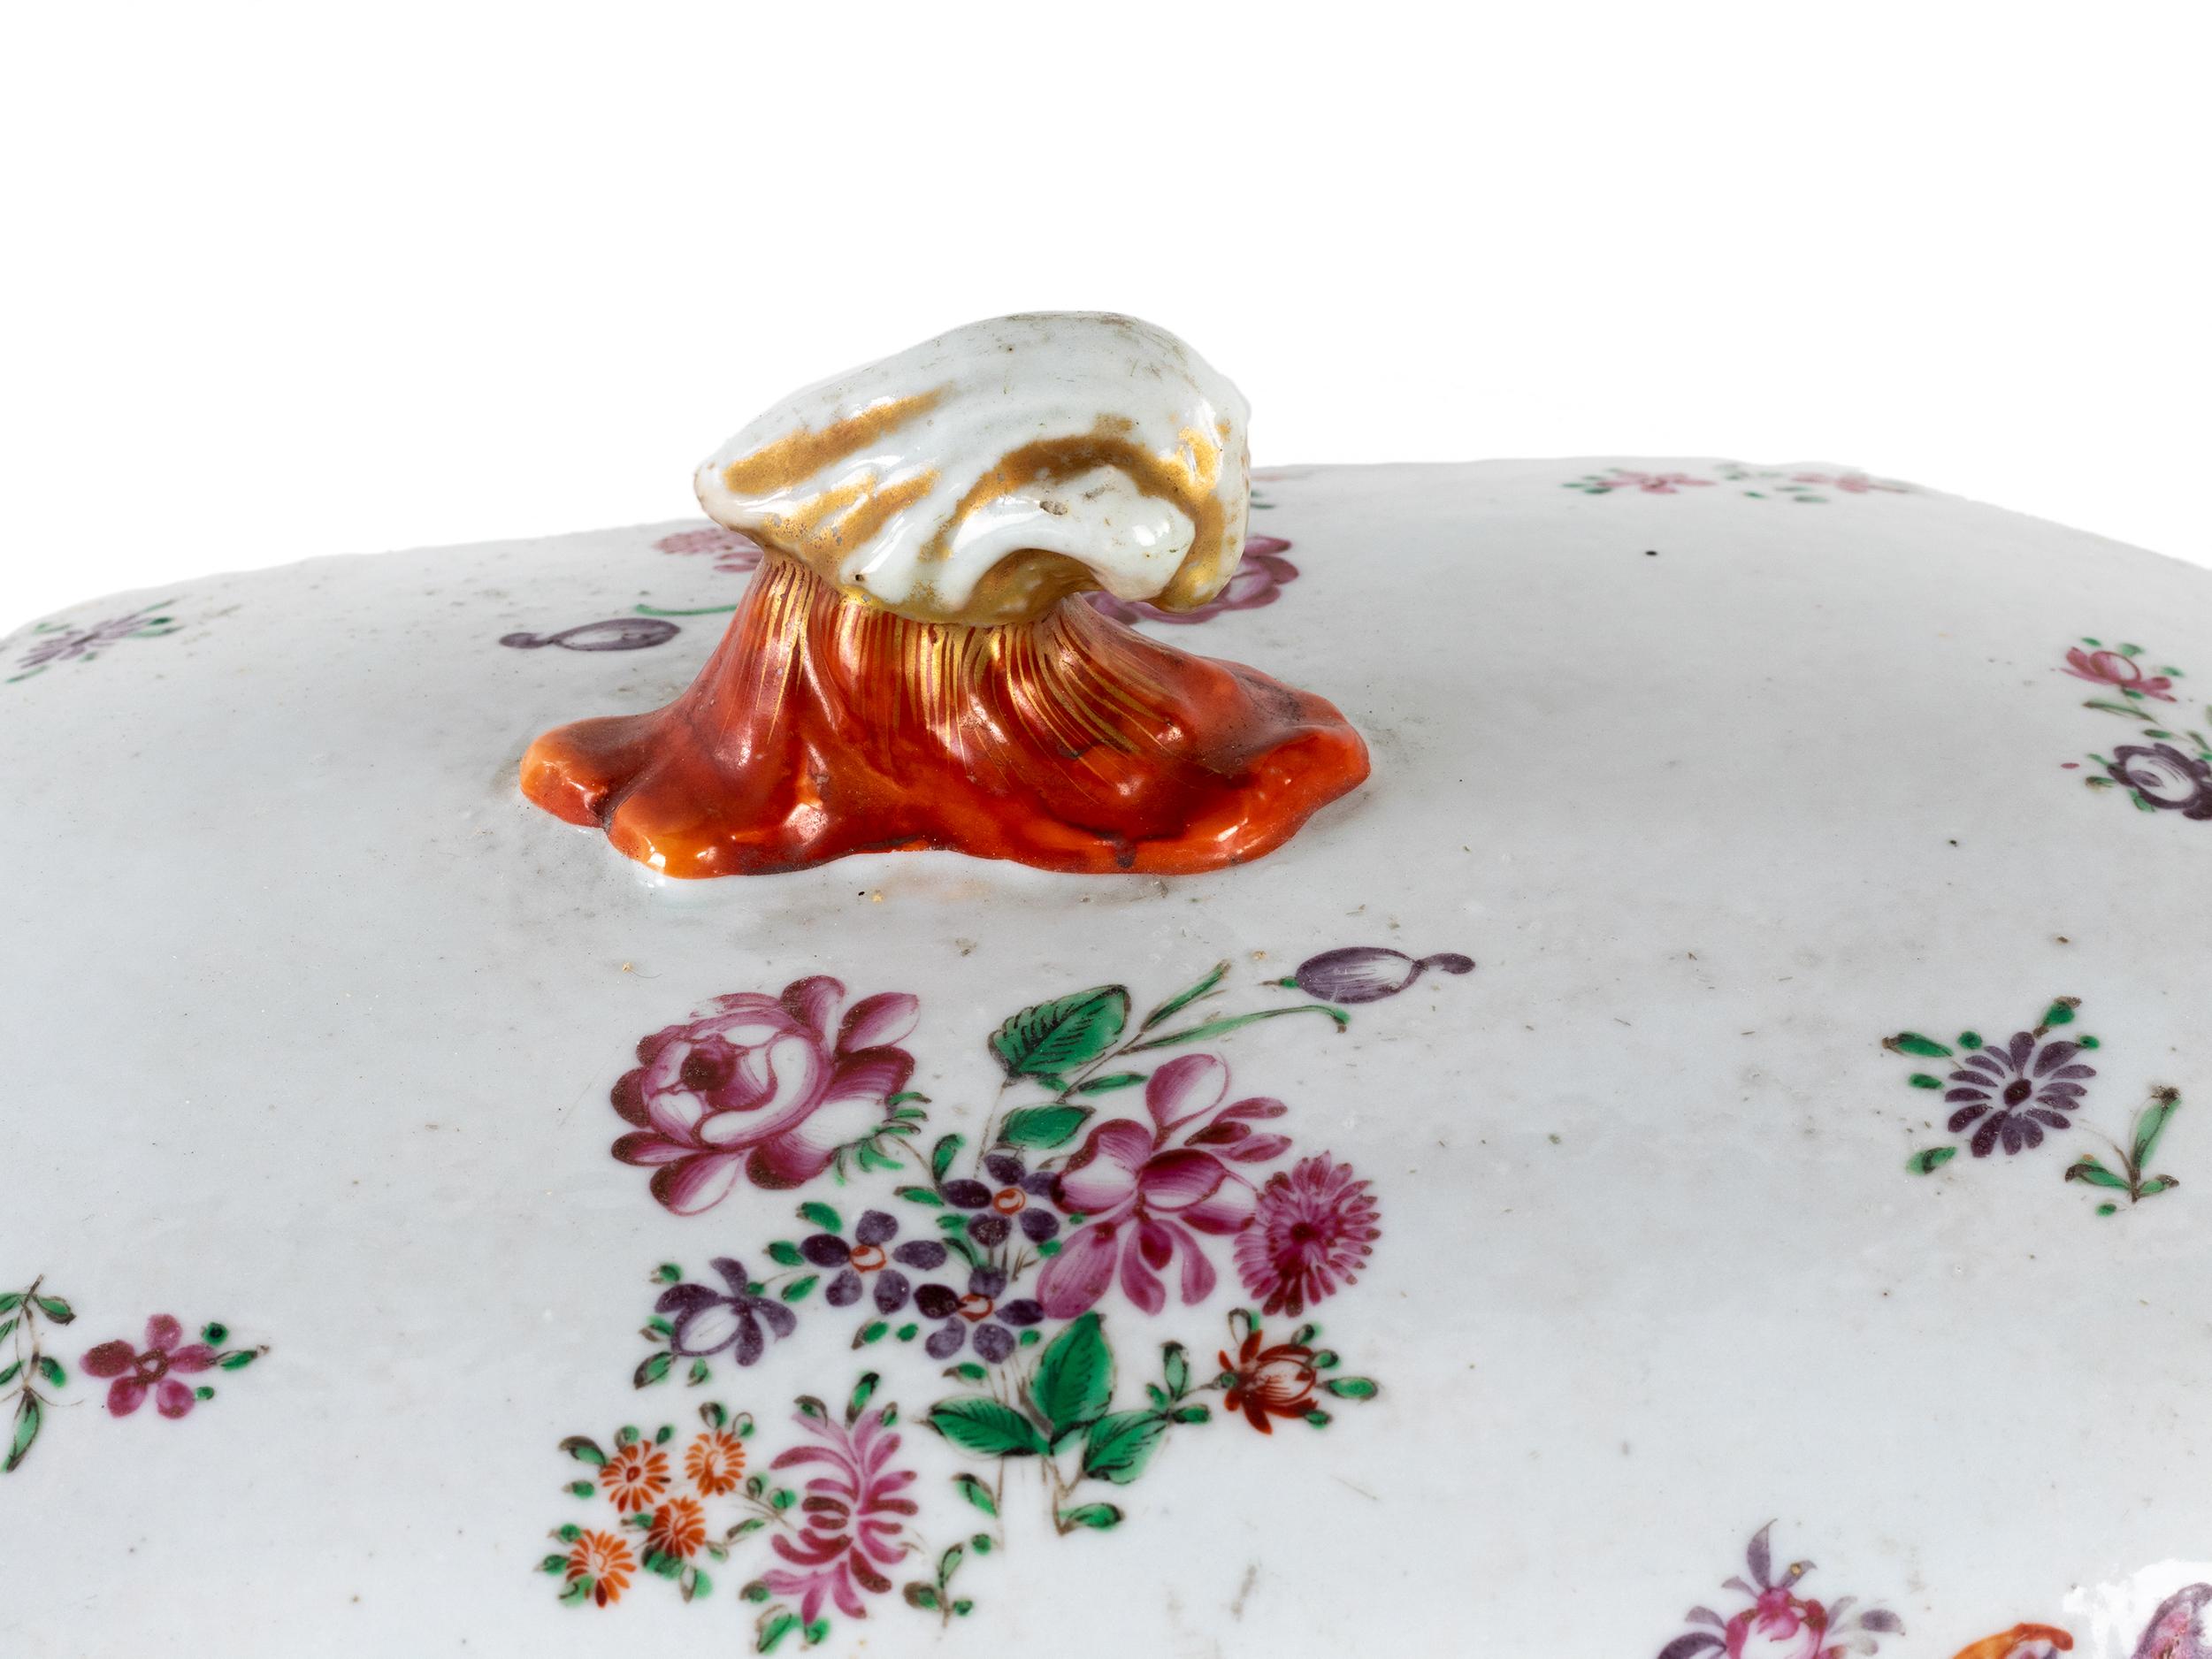 A white polychrome porcelain tureen lid with red peripheral details and vegetative decoration by the Portuguese India Company.